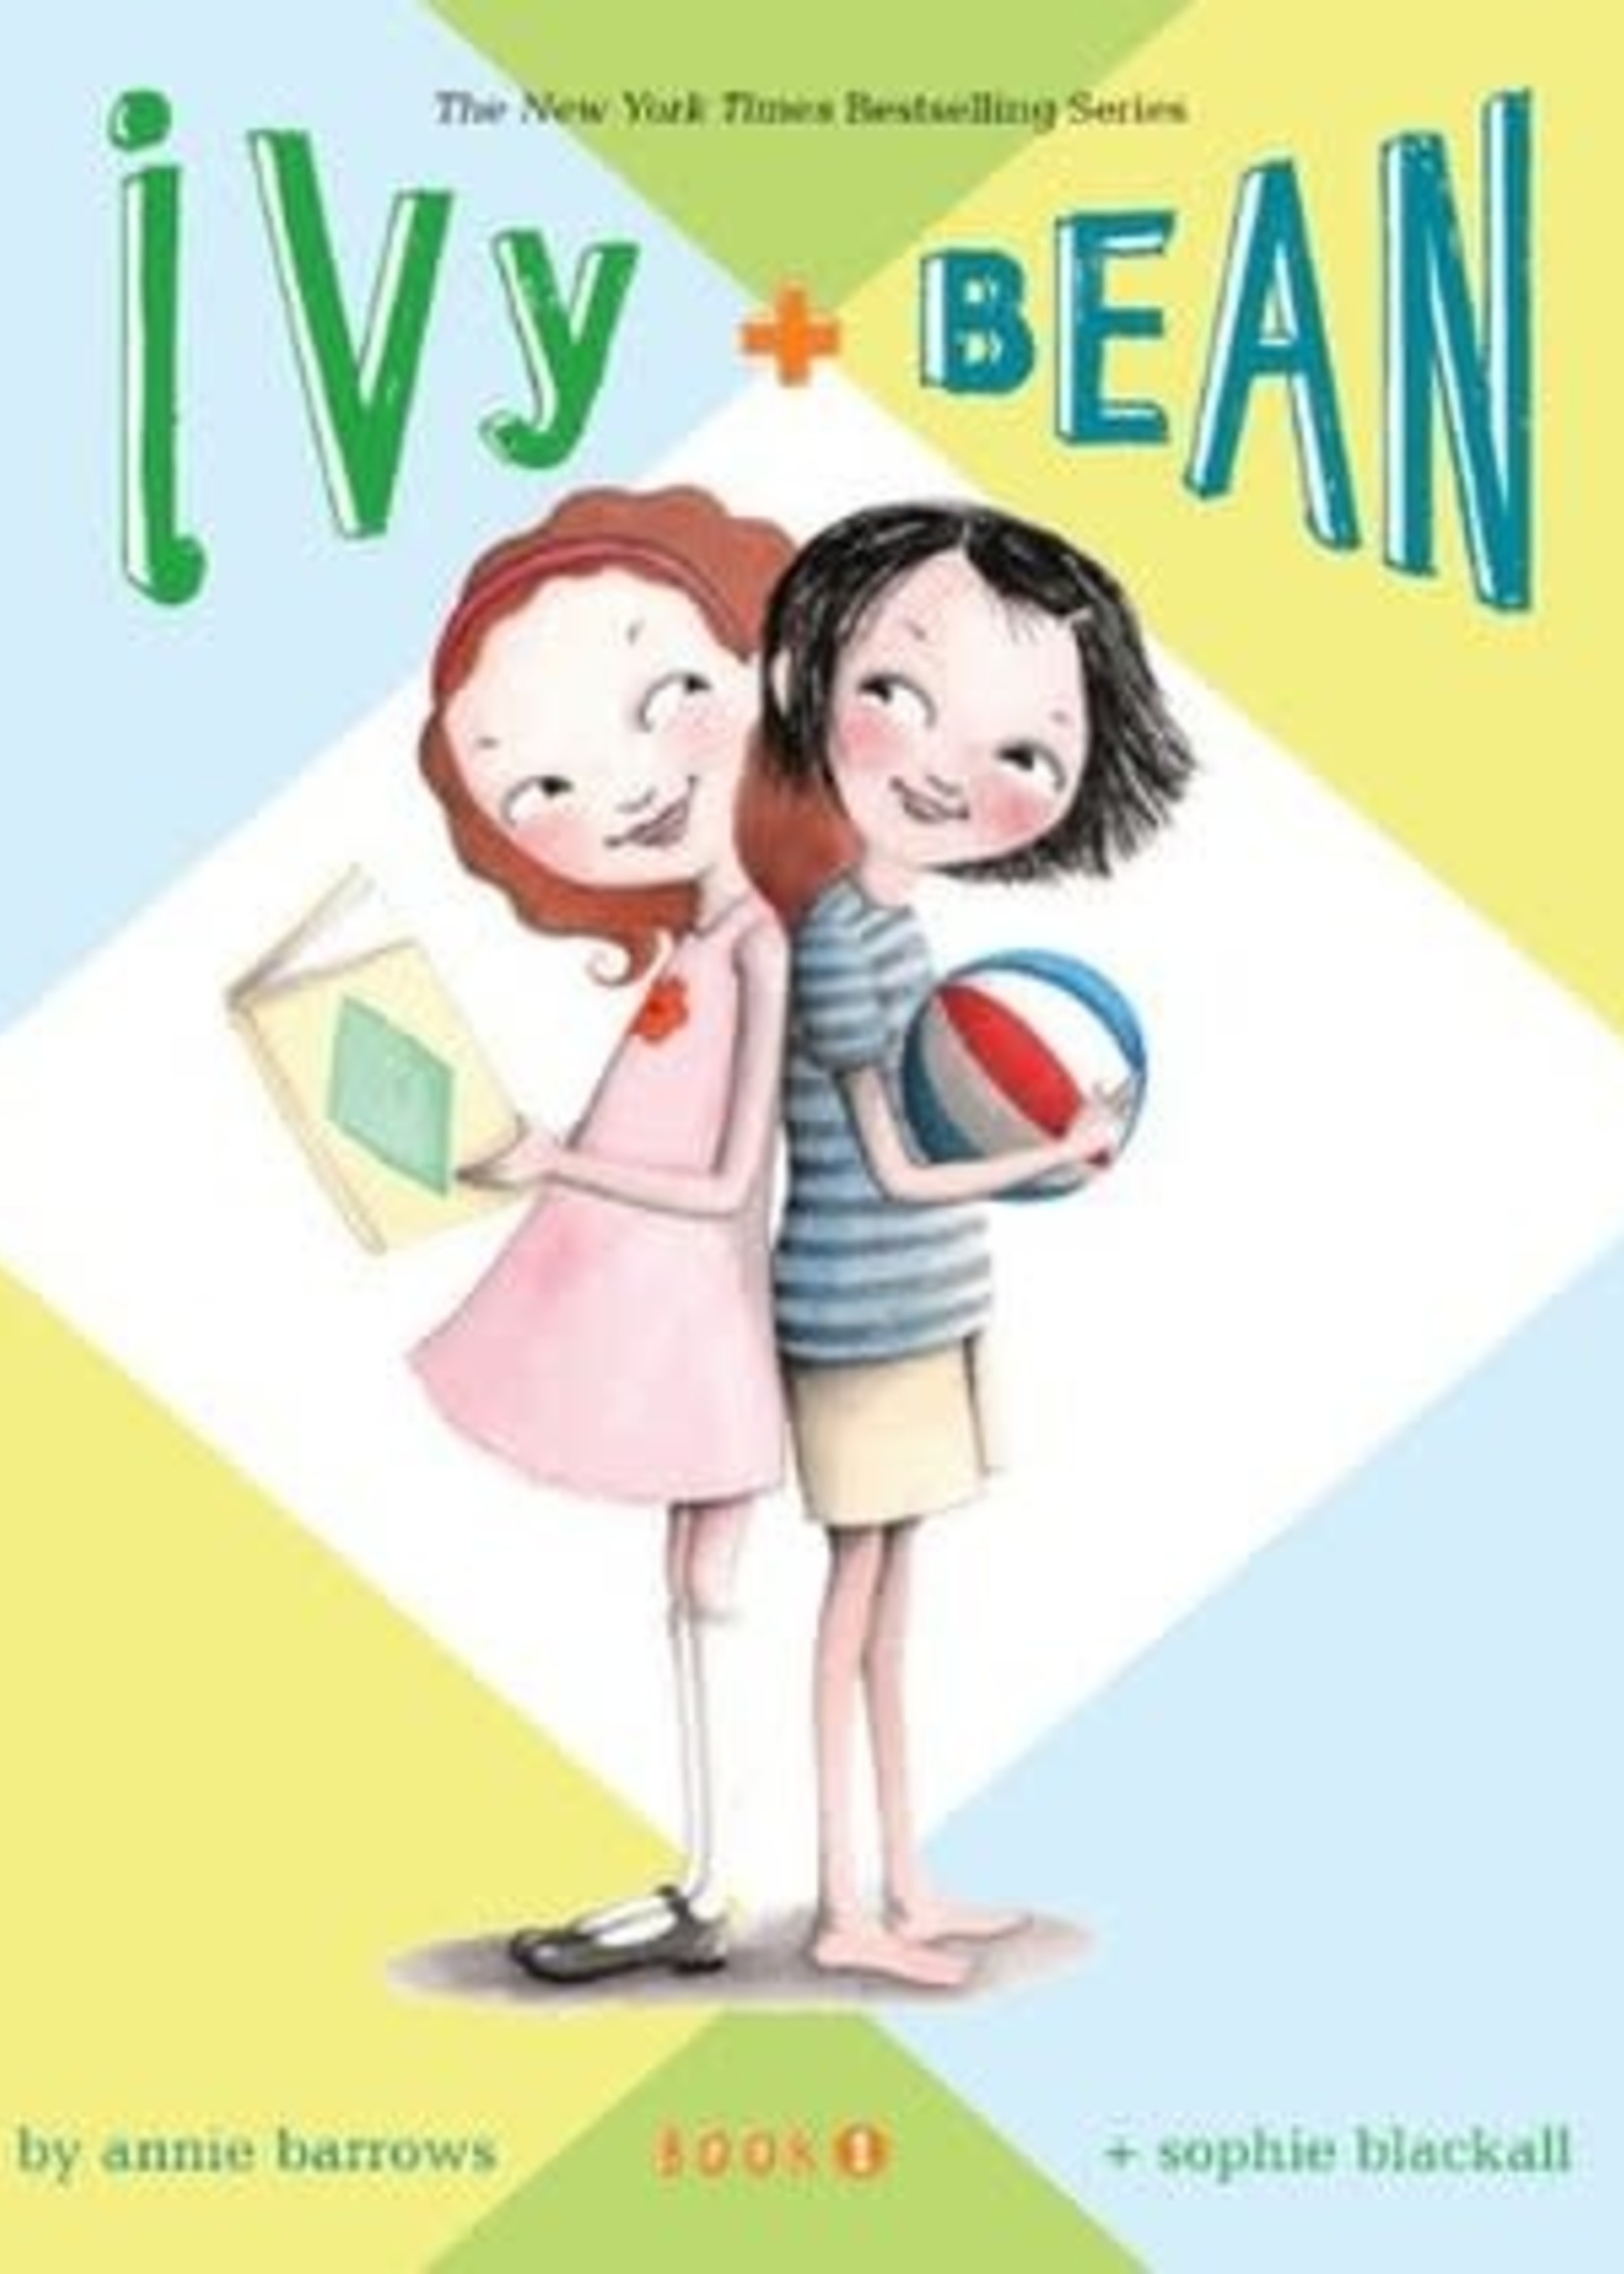 Ivy and Bean by Annie Barrows,  Sophie Blackall